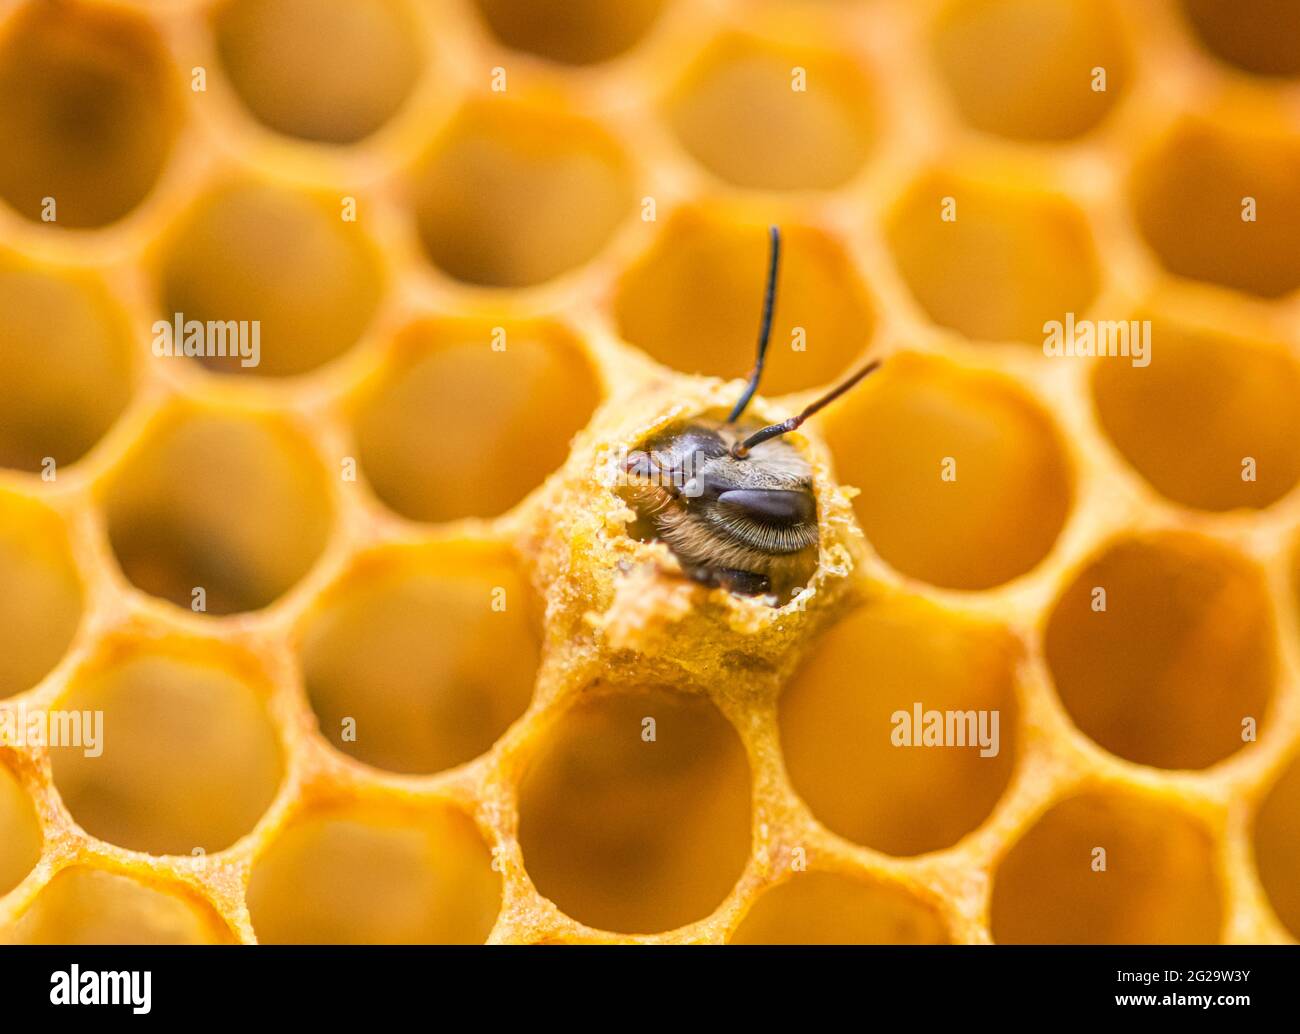 https://c8.alamy.com/comp/2G29W3Y/a-new-honey-bee-apis-mellifera-emerging-from-its-brood-cell-closeup-2G29W3Y.jpg